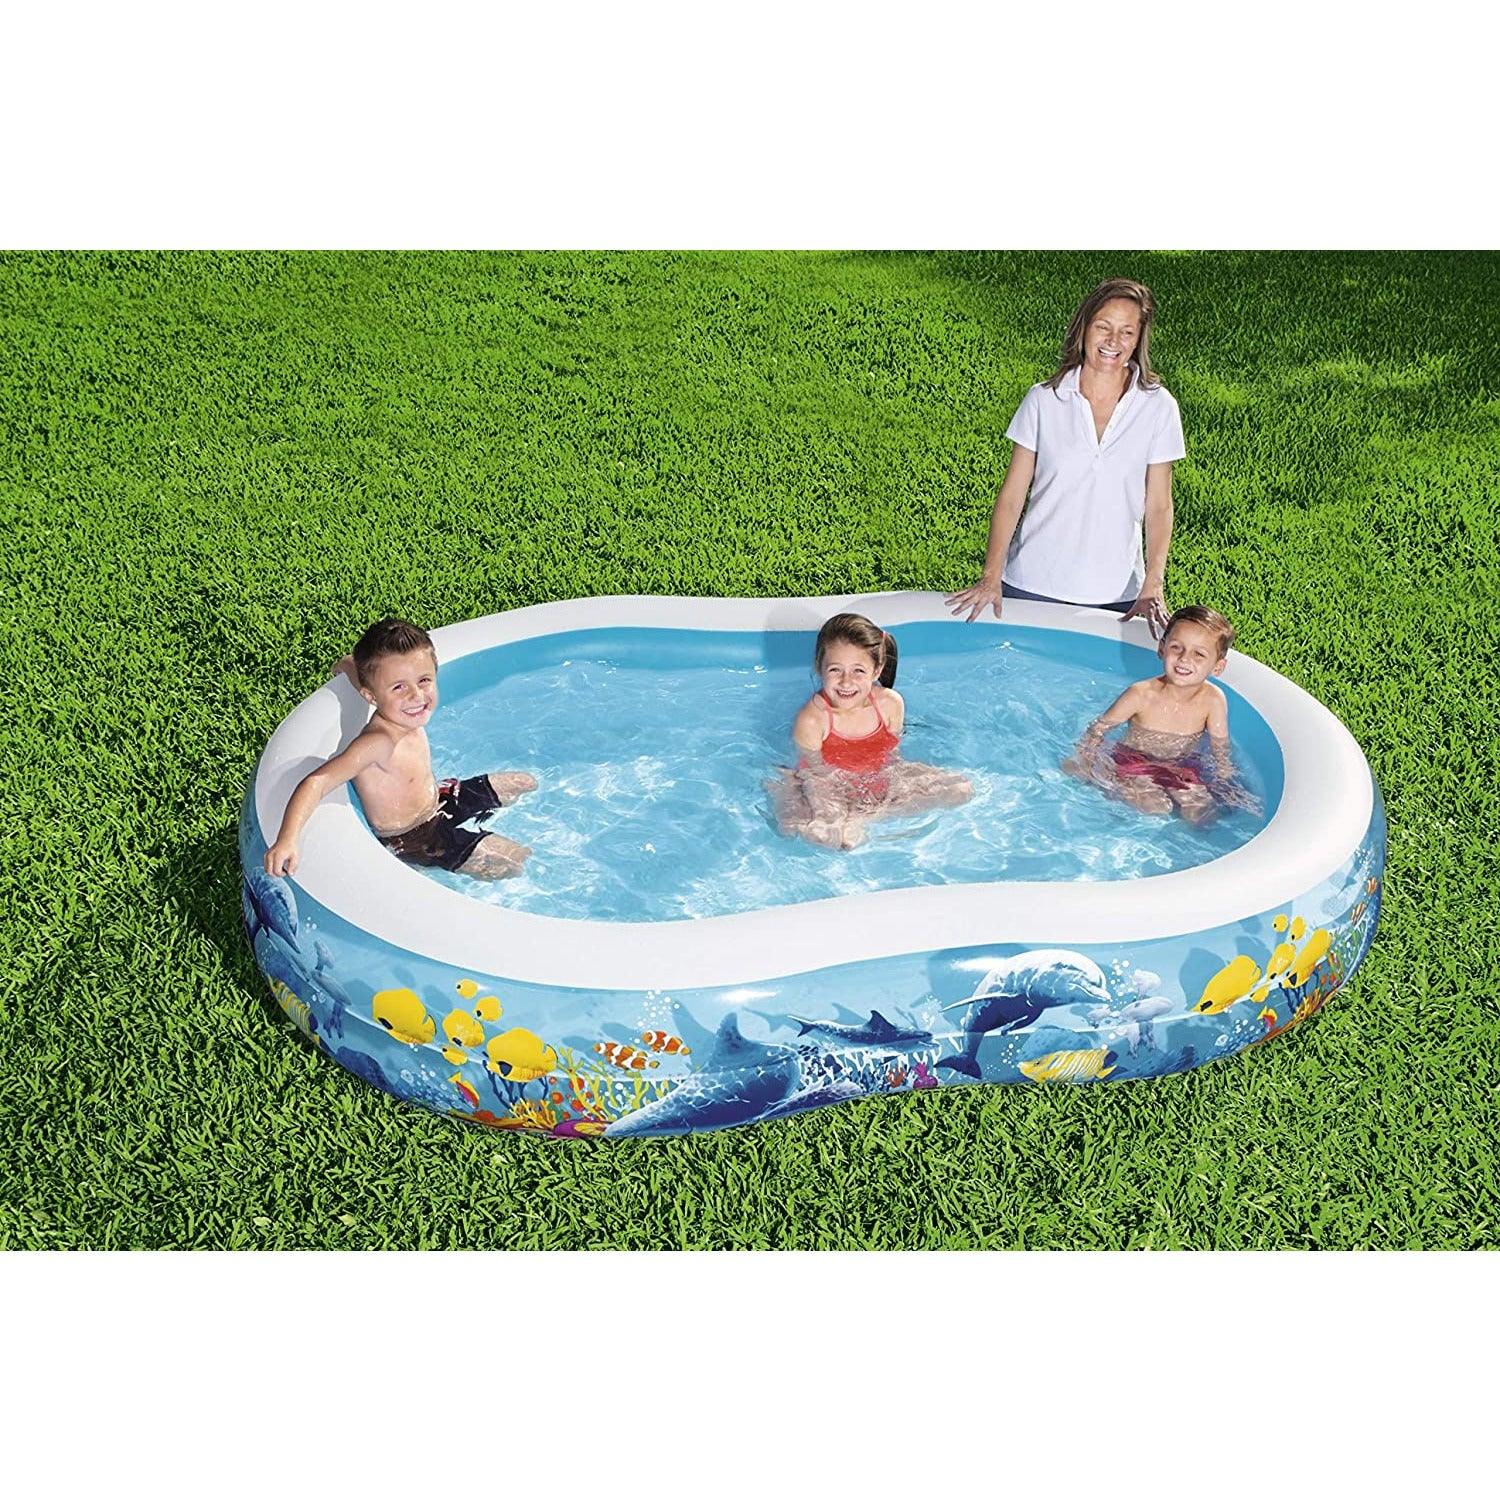 Bestway 54118 Sea Creatures-Printed Inflatable Swimming Pool - BumbleToys - 5-7 Years, 8-13 Years, Bestway, Boys, Floaters, Girls, Sand Toys Pools & Inflatables